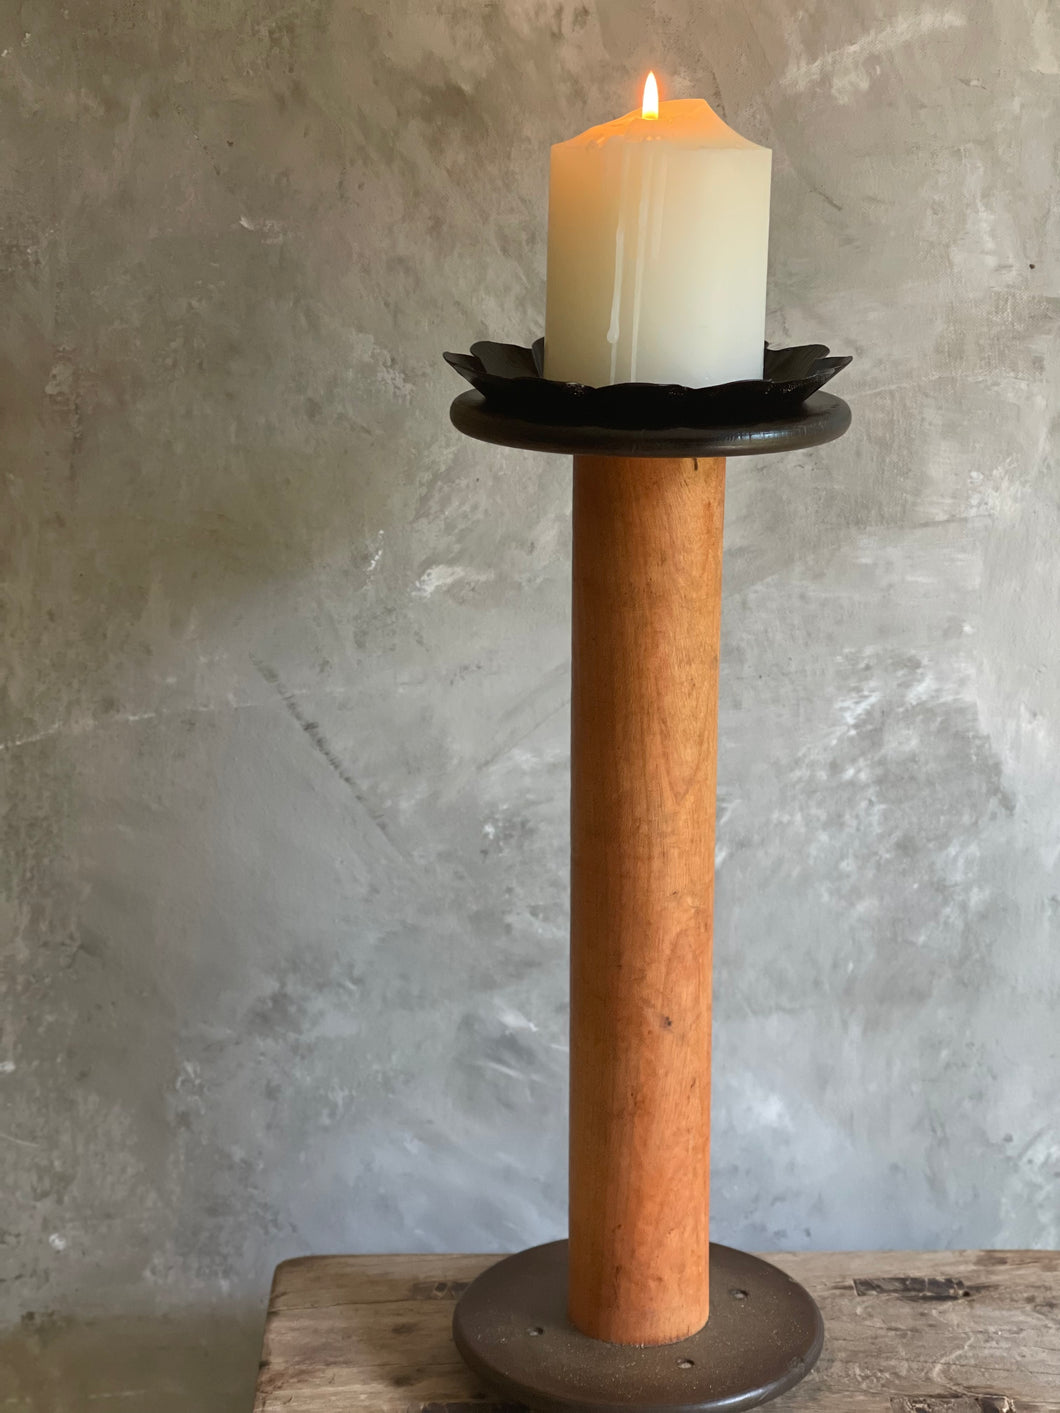 Large Rustic Industrial Bobbin With Candle Pan.